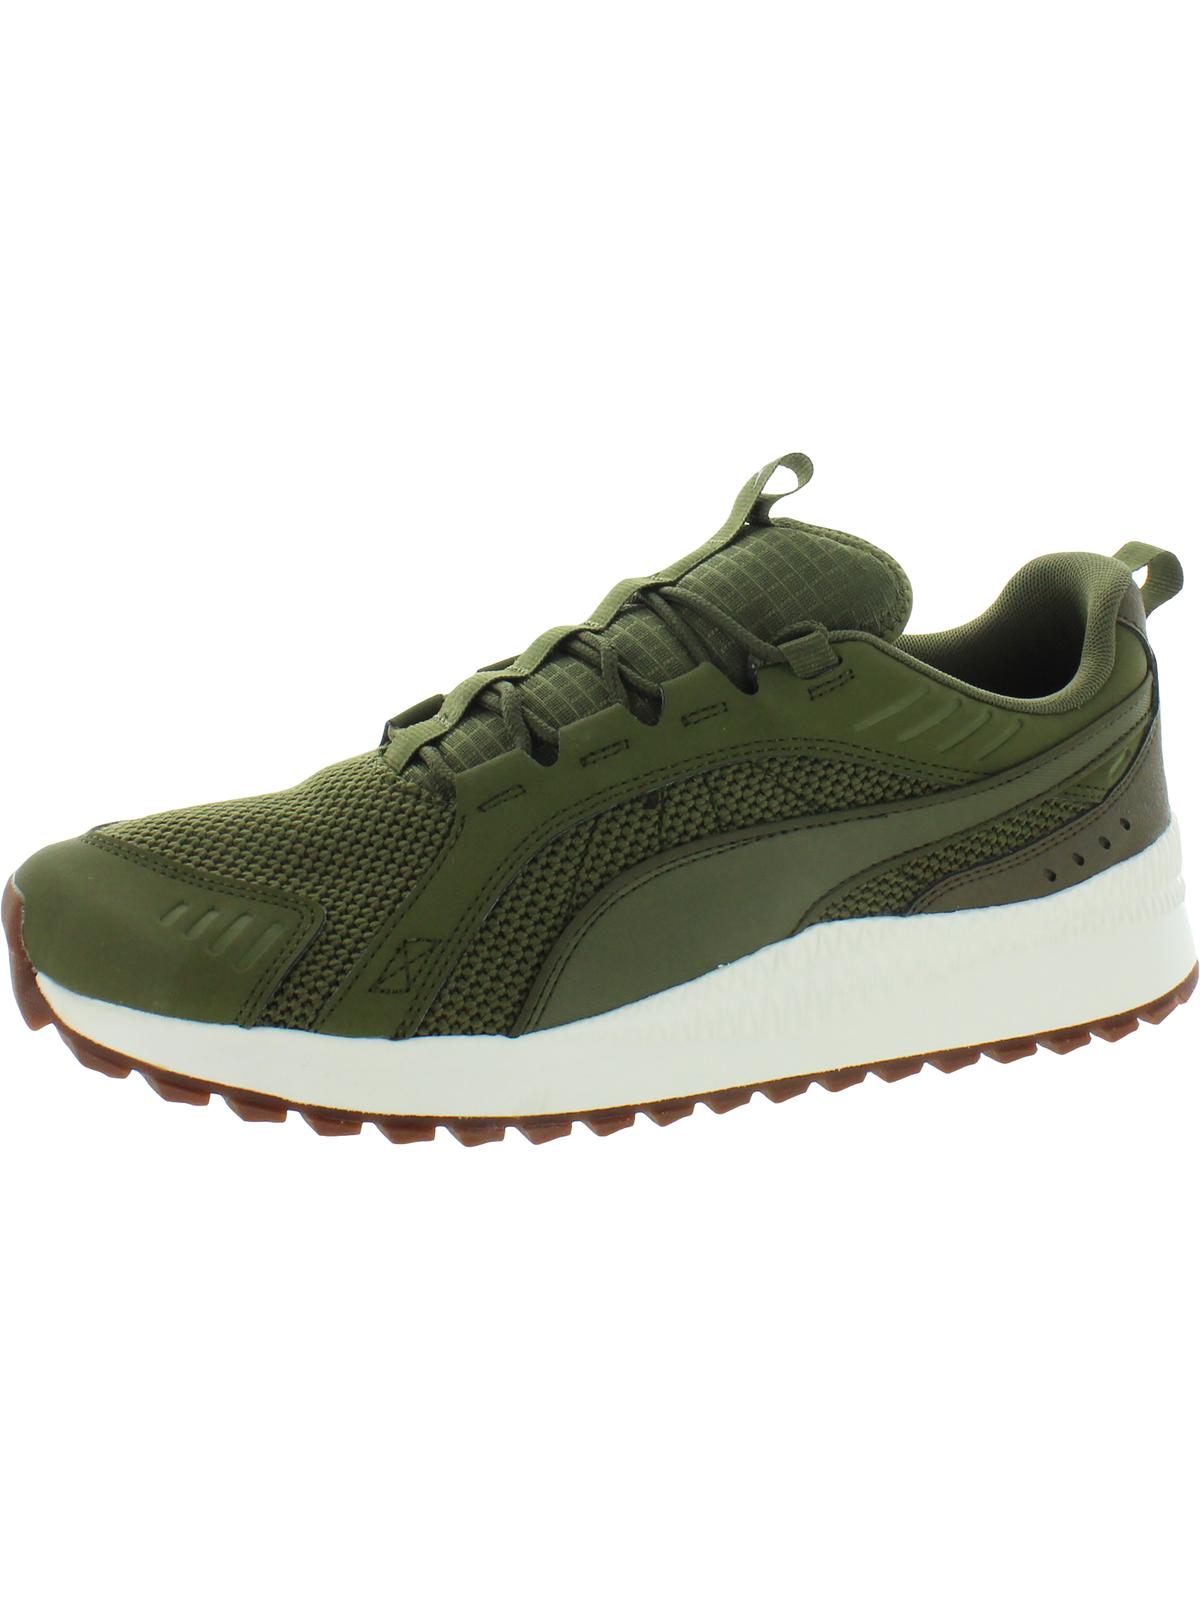 Puma Mens Pacer Next R Fitness Workout Athletic Shoes Green 11.5 Medium (D) - image 1 of 2